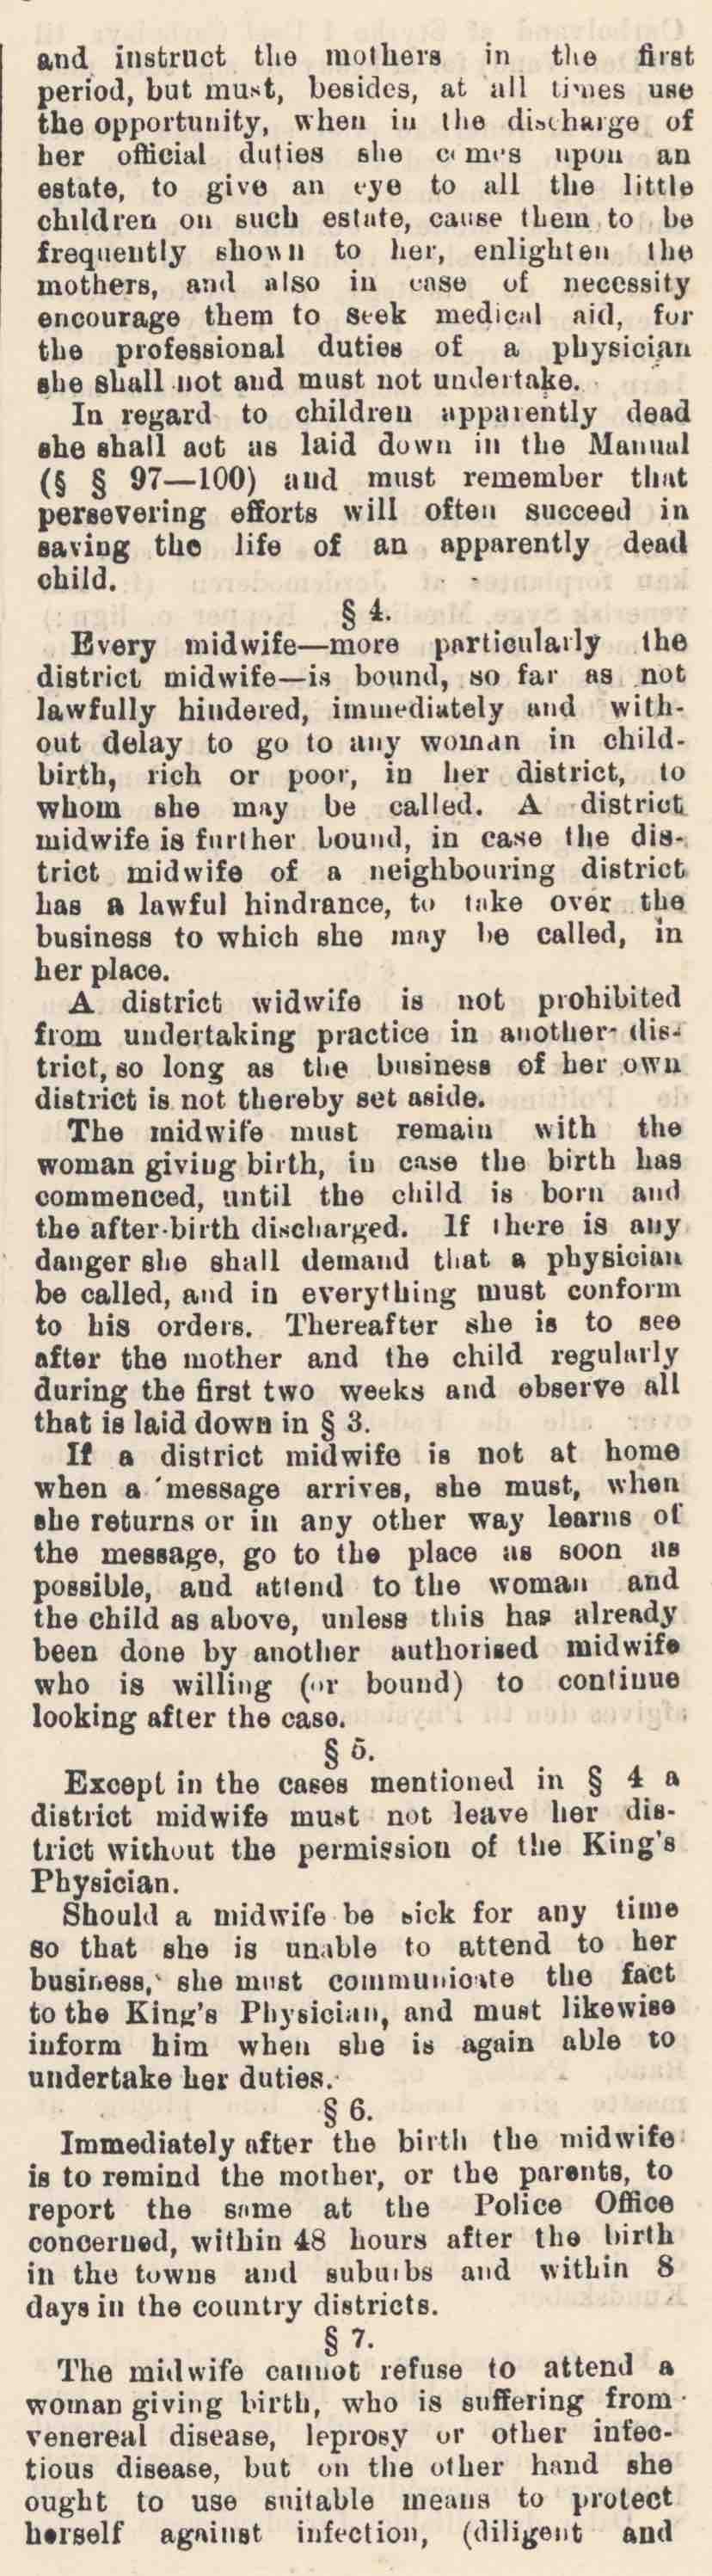 Rules for nurses and midwives in the Virgin Islands